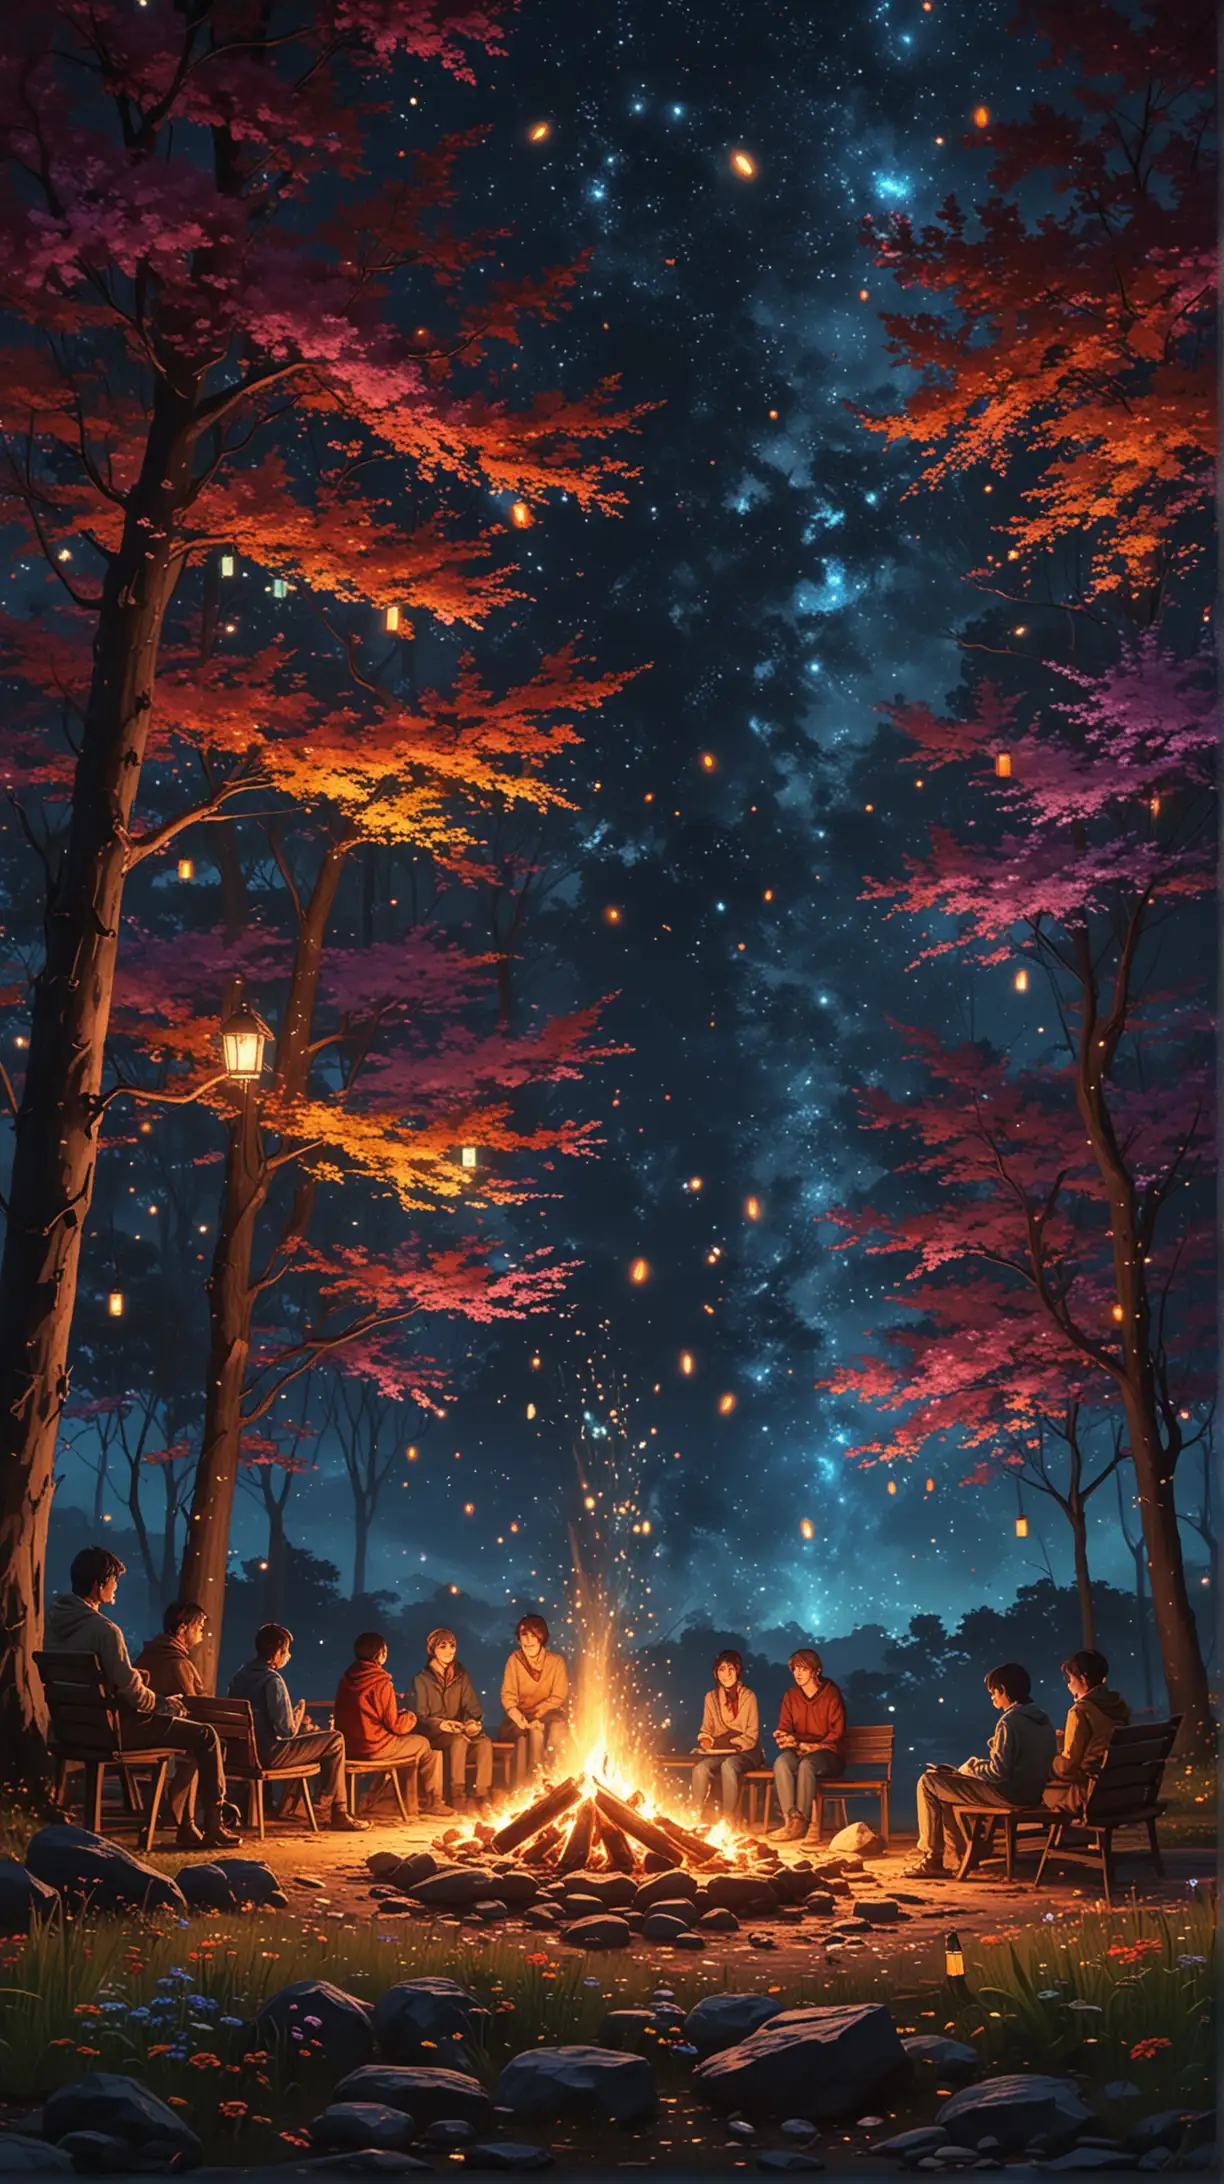 Campfire Gathering Under Starlit Sky with Vibrant Lanterns and Floral Dcor